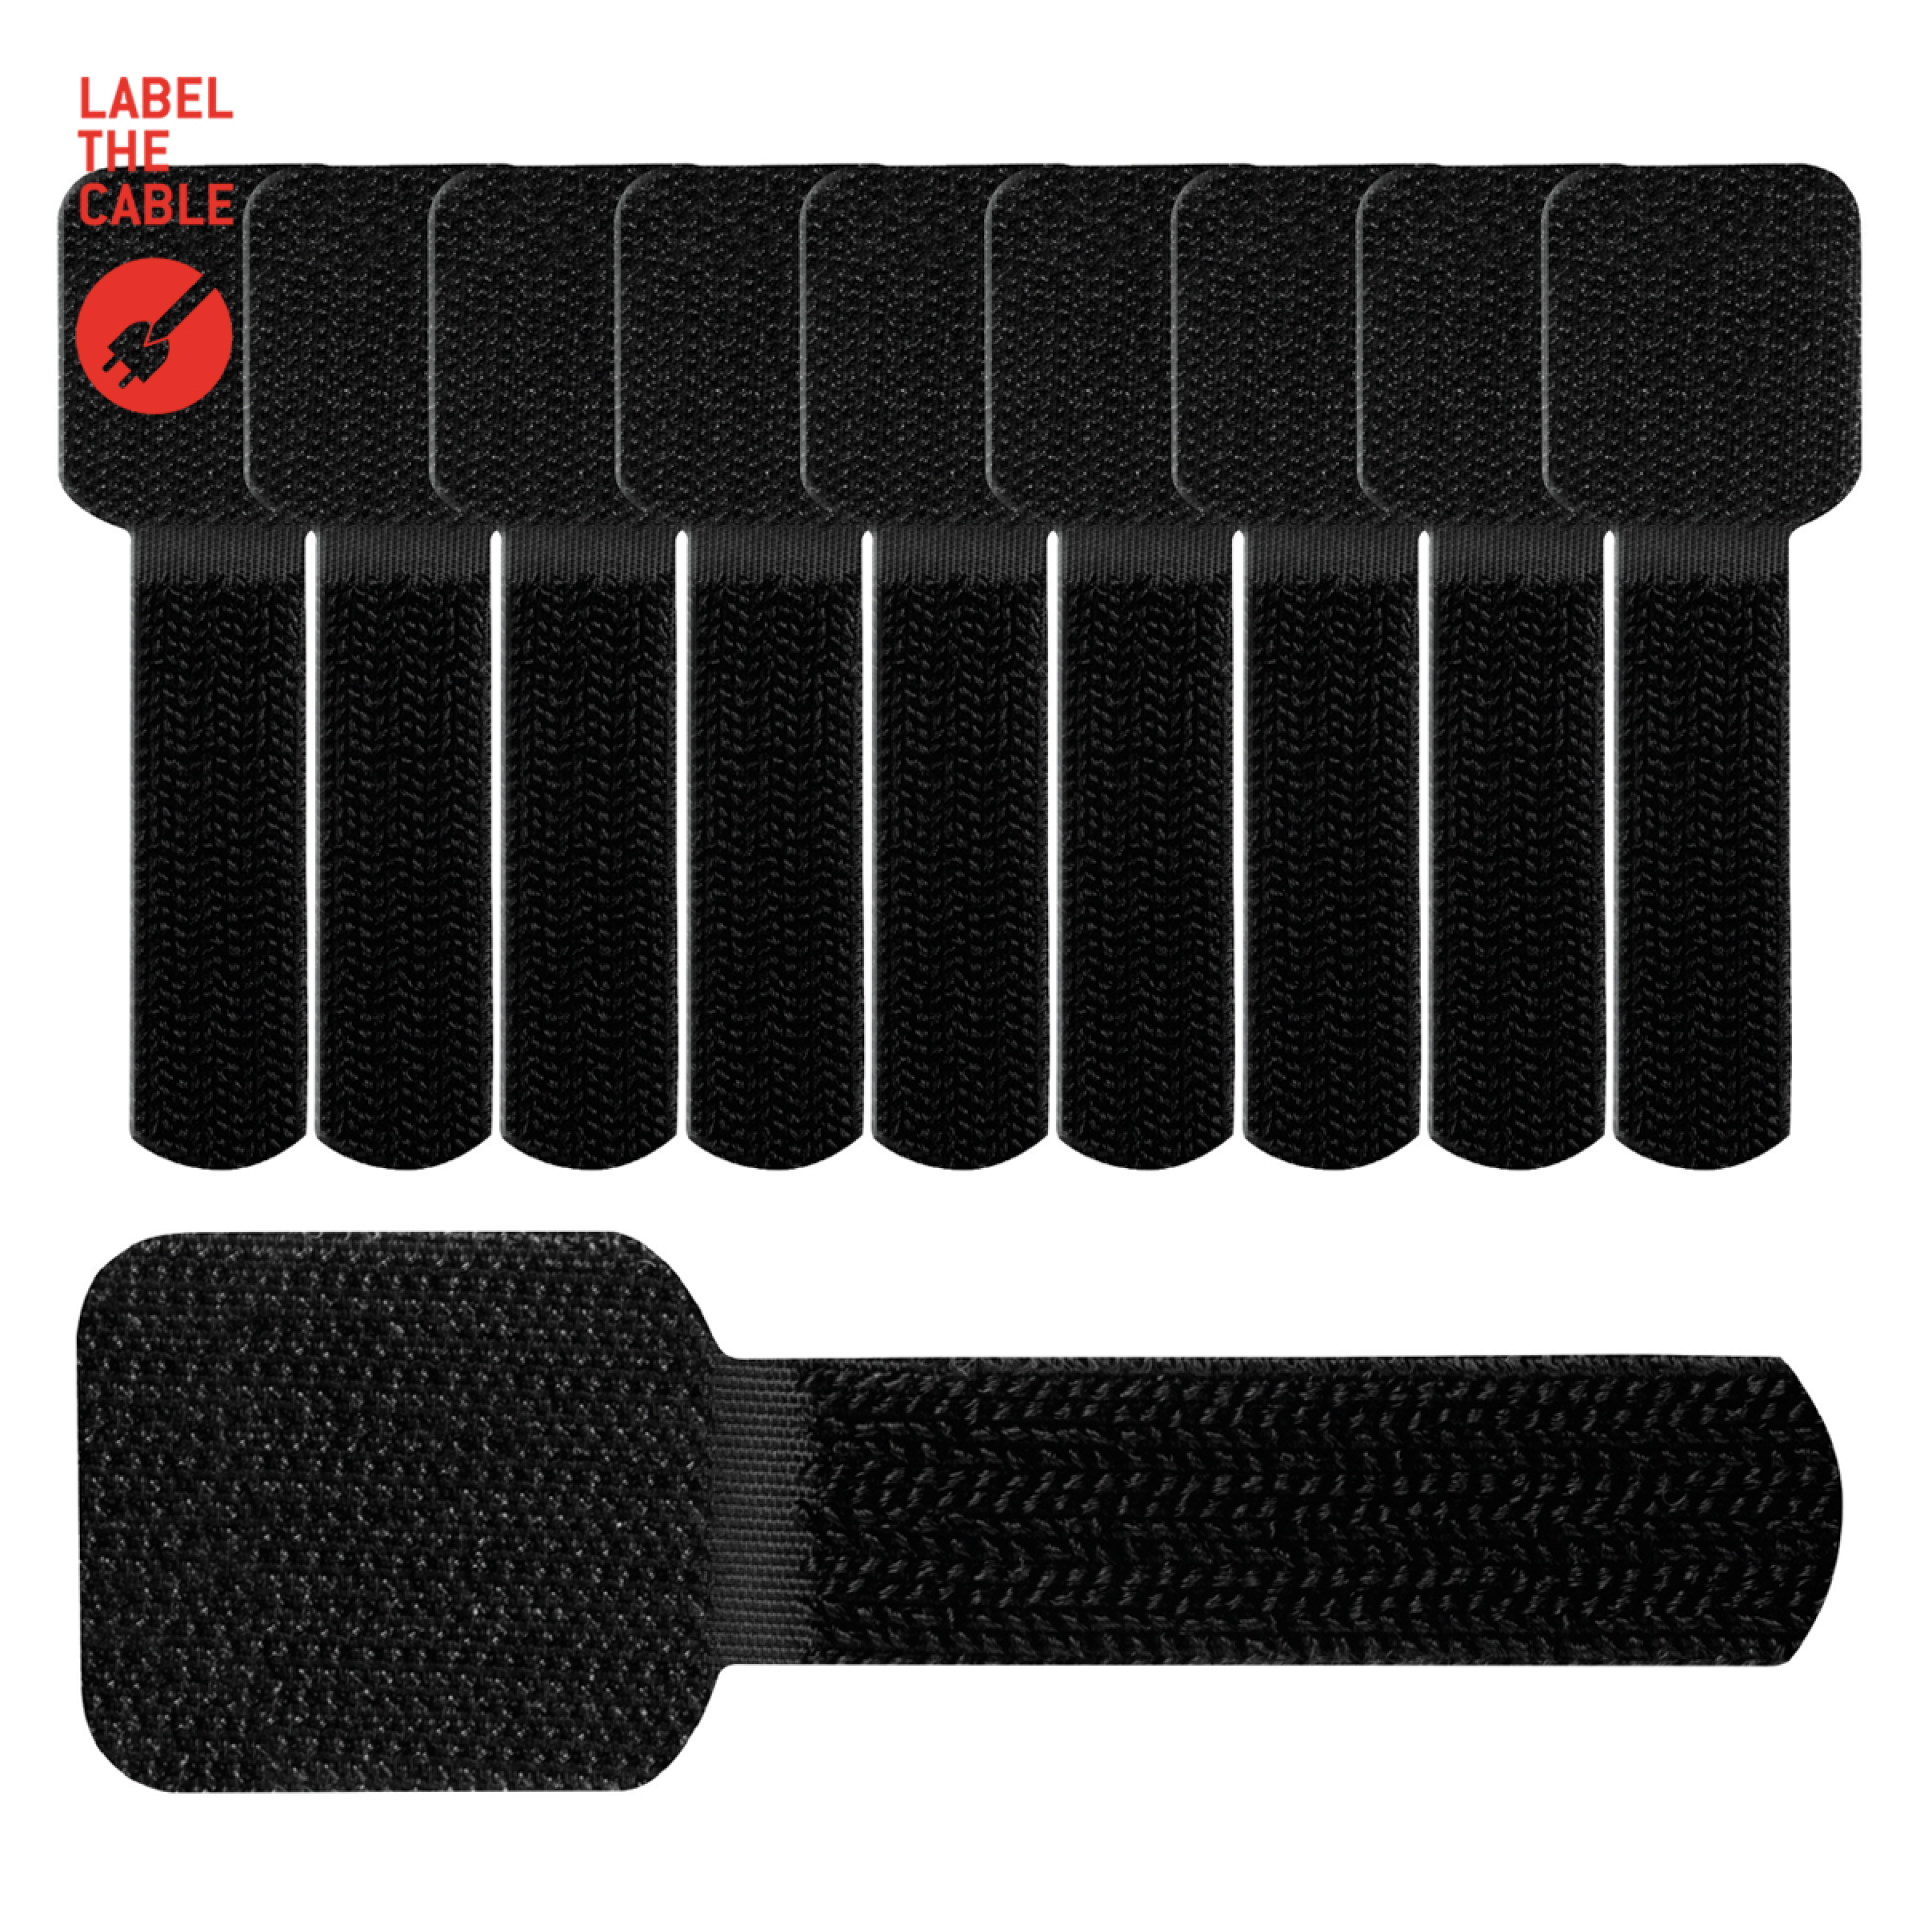 LTC WALL STRAPS, self-adhesive hook and loop cable holders set of 10 pcs black